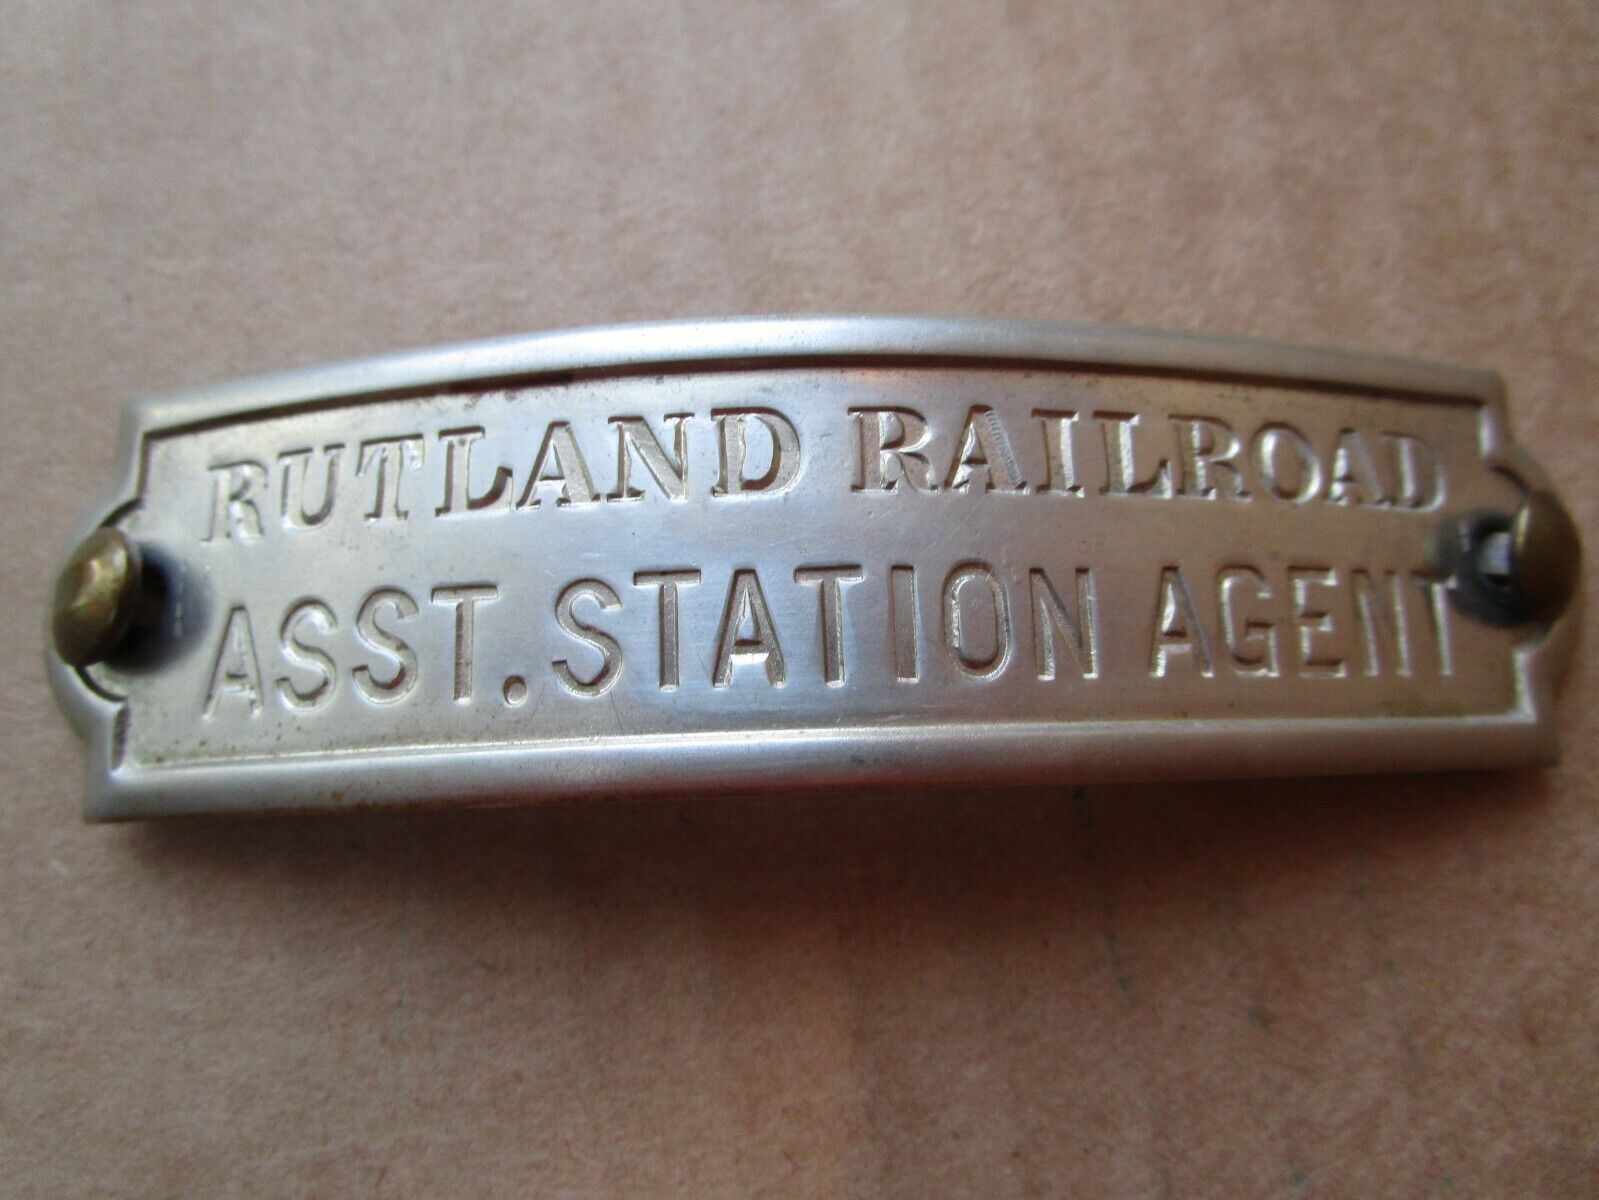 Rutland Railroad Assistant Station Agent hat badge Am Ry Supply 